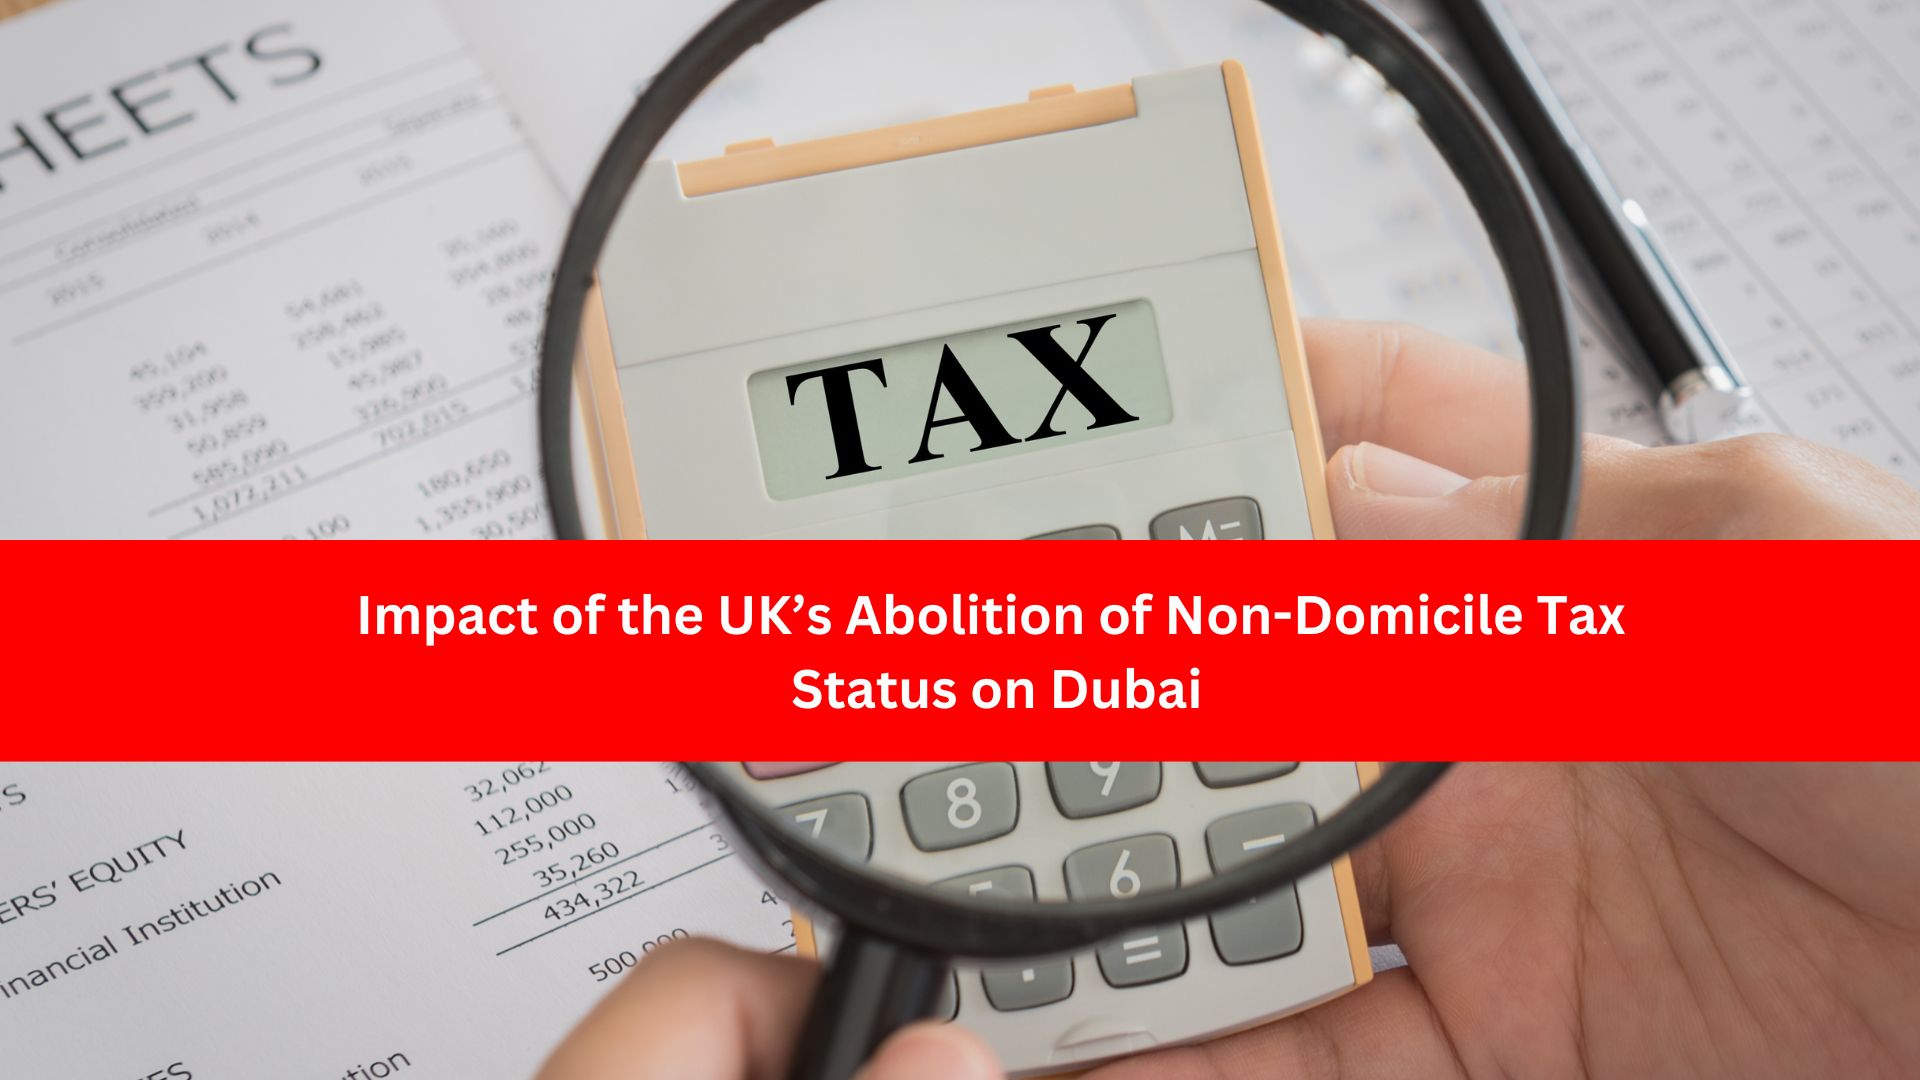 #non dom status #income tax #corporate tax uae #uk tax #corporate tax uae 2023 #income tax rates #uae corporate tax 2023 #personal tax #revenue uk #tax status #corporate tax in dubai #dubai tax #income tax uk #corporate tax in uae 2023 #tax planning uk #tax free income #non dom status uk #non dom #high net worth tax planning #uae corporate tax law #tax free countries #tax year #wealth tax #income tax in uk for foreigners #tax benefits #tax revenue uk #uae tax #personal tax allowance #tax residency #high net worth individual tax planning #corporate income tax uae #ta x #income tax for business #high net worth individuals tax strategies #business tax uk #corporate tax uae free zone #uae corporate tax 2023 free zone #uae tax residency #tax in dubai for foreigners #tax in uk for foreigners #new tax regime #uk domicile for tax #uae corporate tax free zone #non dom tax status #dubai tax residency #dubai company tax #remittance uk #income tax planning #income tax in dubai #foreign income tax #corporate tax dubai 2023 #uk tax for non residents #tax allowance #tax residency uae #corporate tax services in uae #tax uae #uk tax law #tax planning for high earners #tax residency dubai #reduce taxable income uk #income tax in uae for foreigners #income tax in uae #tax free zone dubai #tax domicile #dubai free zone corporate tax #tax rules #non dom tax uk #emirate tax #tax the rich #corporate tax in dubai free zone #tax policy #pay tax uk #uk personal tax #dubai business tax #reduce income tax uk #domiciled in the uk #uk non dom #uae tax free zone #uk tax year #income tax in dubai for foreigners #corporate tax companies #company tax in dubai #taxable benefits uk #tax london #taxation law #non domicile tax uk #tax uk 2023 #new corporate tax uae #uae income tax 2023 #taxation in dubai #corporate tax law #taxes in uae for business #tax income tax #uk tax on foreign income #uk non domiciled tax status #non domicile uk #tax reduction uk #tax uk for non residents #non domicile tax status #non domicile status #corporate tax in dubai 2023 #non dom tax #tax reduce #non domicile #non dom status uk tax #corporate tax in the uae #uk non domicile status #uk non dom tax status #non domicile tax #uk tax non domicile #business tax in dubai #non domicile status in uk #non domicile in uk #british non dom status #non dom status tax #company tax dubai #corporate tax for free zone companies #business tax in uae #non domiciled status uk #non dom fee uk #non dom uk status #non domicile tax rules uk #new tax in uae 2023 #non dom tax benefits #uk tax residency #uk non dom rules #tax non domiciled uk #income tax on foreign income #taxation in uae #company tax uae #tax rules for non domiciled #ways to reduce taxable income uk #non dom taxation #non dom rules #dubai tax residency requirements #non dom tax rules #non dom tax rules uk #nondom status #taxing non doms #no dom #new tax in uae #not domiciled in the uk #non dom uk rules #dubai corporate tax free zone #uk non domicile rules #dom tax #rules for non dom in uk #non domicile rules uk #non dom regime uk #income tax free investment #tax for non domiciled uk residents #dom status #applying for non domicile status #become non domiciled uk #uk global tax #non domicile rules #countries with non dom status #non dom regime #uk non dom regime #non dom tax changes #tax planning high net worth #uae taxation #changes to non dom rules #free zone corporate tax uae #hnw tax planning #capital gains tax for non domiciled uk #non dom countries #number of non doms in uk #domicile status uk #uk non dom tax rates #capital gains tax non domiciled #non dom changes #doms uk #corporate tax law in uae #non uk domiciled tax planning #tax example #tax in uae 2023 #moving to dubai from uk tax #previous tax year #domicile tax rules uk #working in dubai tax free #fiscal residence #uk inheritance tax for non domiciled non residents #non dom tax countries #uk tax policy #uk domicile tax rules #tax status uk #domicile for tax purposes uk #corporation tax in dubai #global tax uk #new tax year #no tax dubai #domicile rules uk #zero tax dubai #tax benefits uk #new tax law uk #zero tax in dubai #income tax thresholds #tax residency in uae #tax and revenue uk #residence and domicile uk #taxes in dubai for companies #dubai free zone tax #dubai zero tax #no income tax dubai #income tax in london #investment tax uk #tax haven dubai #remittance tax uk #domicile uk law #investment to avoid tax #foreign income uk tax #dubai new tax #dubai is a tax free country #non dom inheritance tax #moving to uk tax #uk tax for foreign income #tax in dubai for business #uae corporate tax for free zone #uk income tax foreign income #dubai is tax free #uk global income tax #ways to reduce income tax uk #england tax #uk non dom inheritance tax #tax on dubai #wealth tax in the uk #dubai zero income tax #no tax in uae #no income tax in uae #dubai tax free income #dubai zero taxes #uk income tax on foreign income #income tax uae 2023 #wealth tax in uk #dubai has tax #taxation business #income tax uk for foreigners #tax from uk #uk tax abroad #new tax in dubai #new tax dubai #foreign income uk #uk tax on foreign earnings #capital gains tax in the uk #new dubai tax #inheritance tax non domicile #dubai tax free country #uk tax on worldwide income #dubai has income tax #dubai tax regime #tax residency for international students #uk taxation on foreign income #capital gains tax dubai #tax on foreign earnings #dubai has no income tax #non domicile uk inheritance tax #dubai taxation policy #tax at uk #income tax for foreigners in uk #dubai new tax law #domicile abroad #uk tax global income #uk tax on earnings abroad #personal income tax uk #dubai tax rules #dubai tax benefits #tax in uk for international students #paying tax in dubai #income from abroad tax #taxable foreign income uk #london tax for foreigners #dubai free tax #tax haven countries for individuals #uk foreign income #tax residency status uk #dubai personal tax #uk tax residence status #uk residency tax rules #fiscal uk #tax free company benefits #dubai tax changes #tax on earnings abroad #london income tax for foreigners #dubai tax policy #foreign earnings not taxable in the uk #income tax rules in uk #residence rules uk #dubai have tax #paying uk tax on foreign income #tax in london for foreigners #inheritance tax non domiciled uk #uk residence for tax purposes #uk tax burden #uk residence and tax